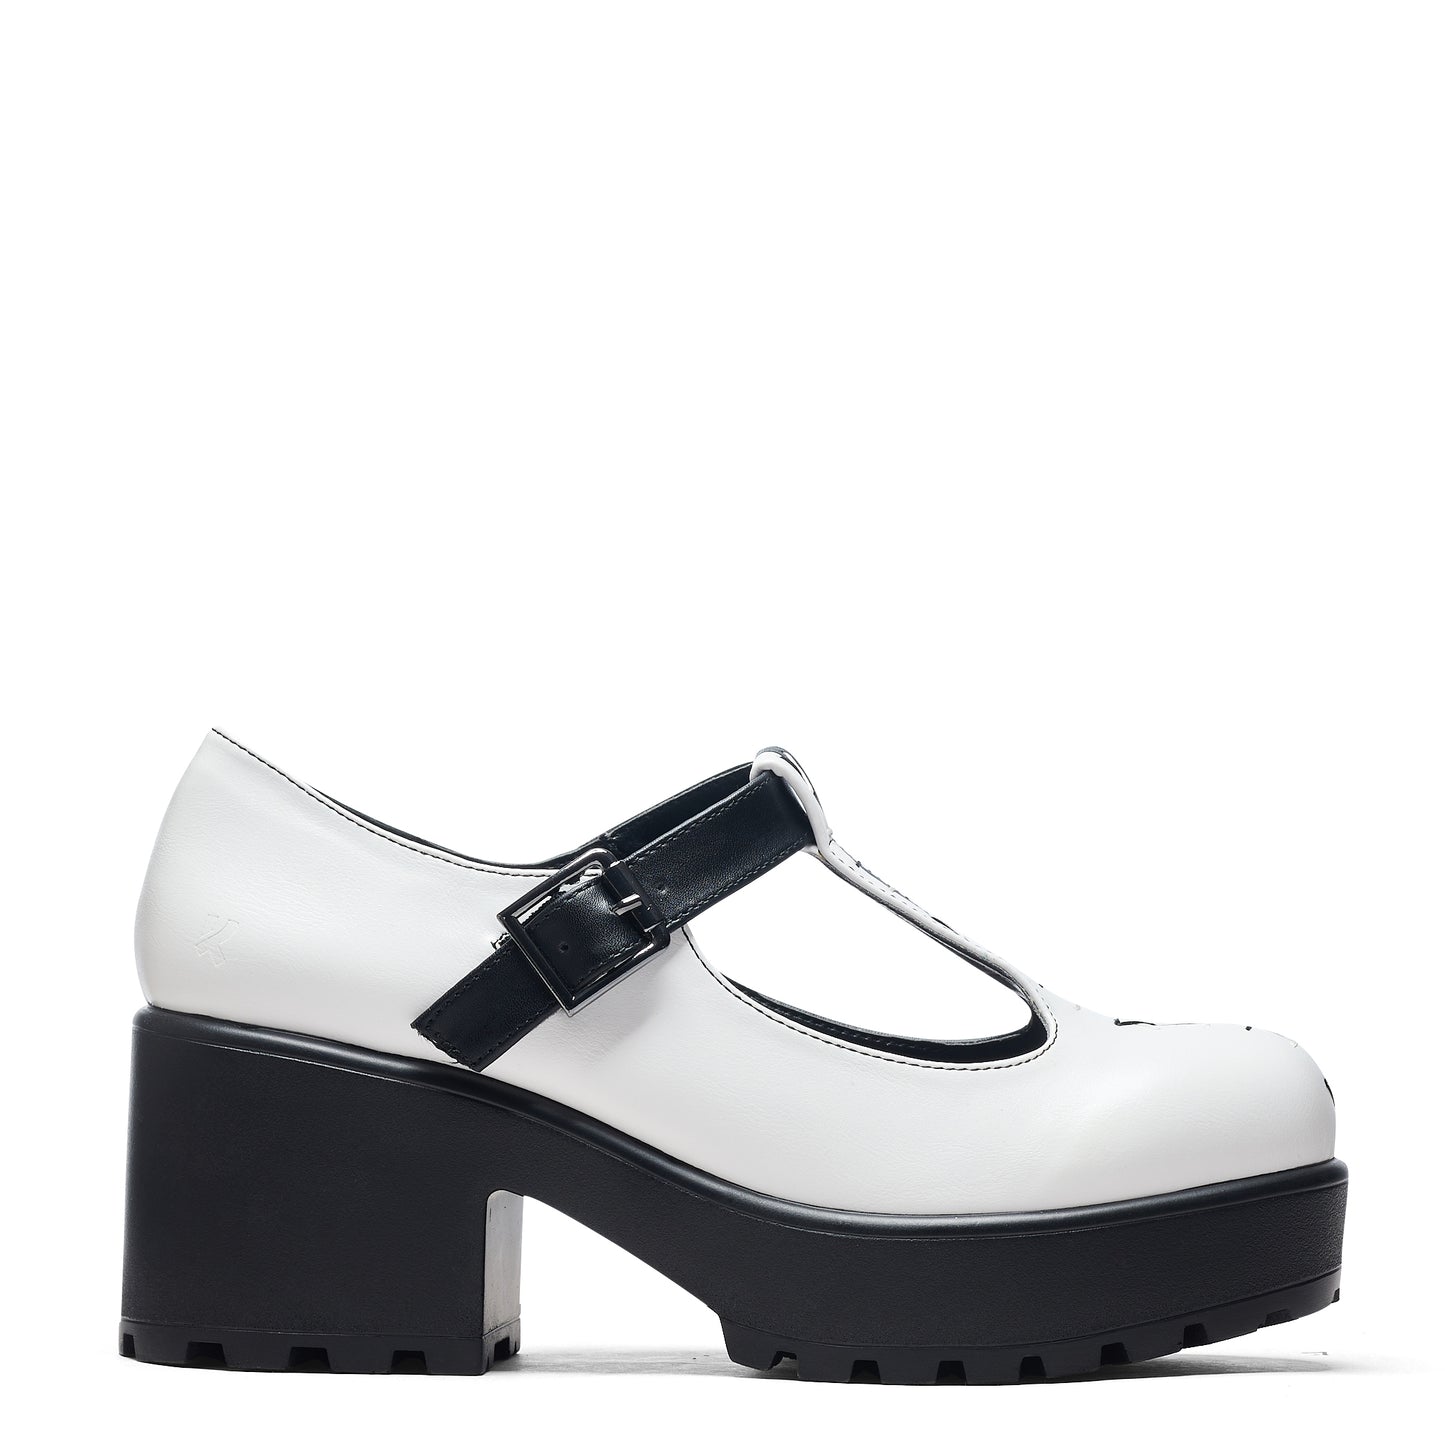 Tira Mary Janes ' Dead or Alive Edition' - Mary Janes - KOI Footwear - White - Side View